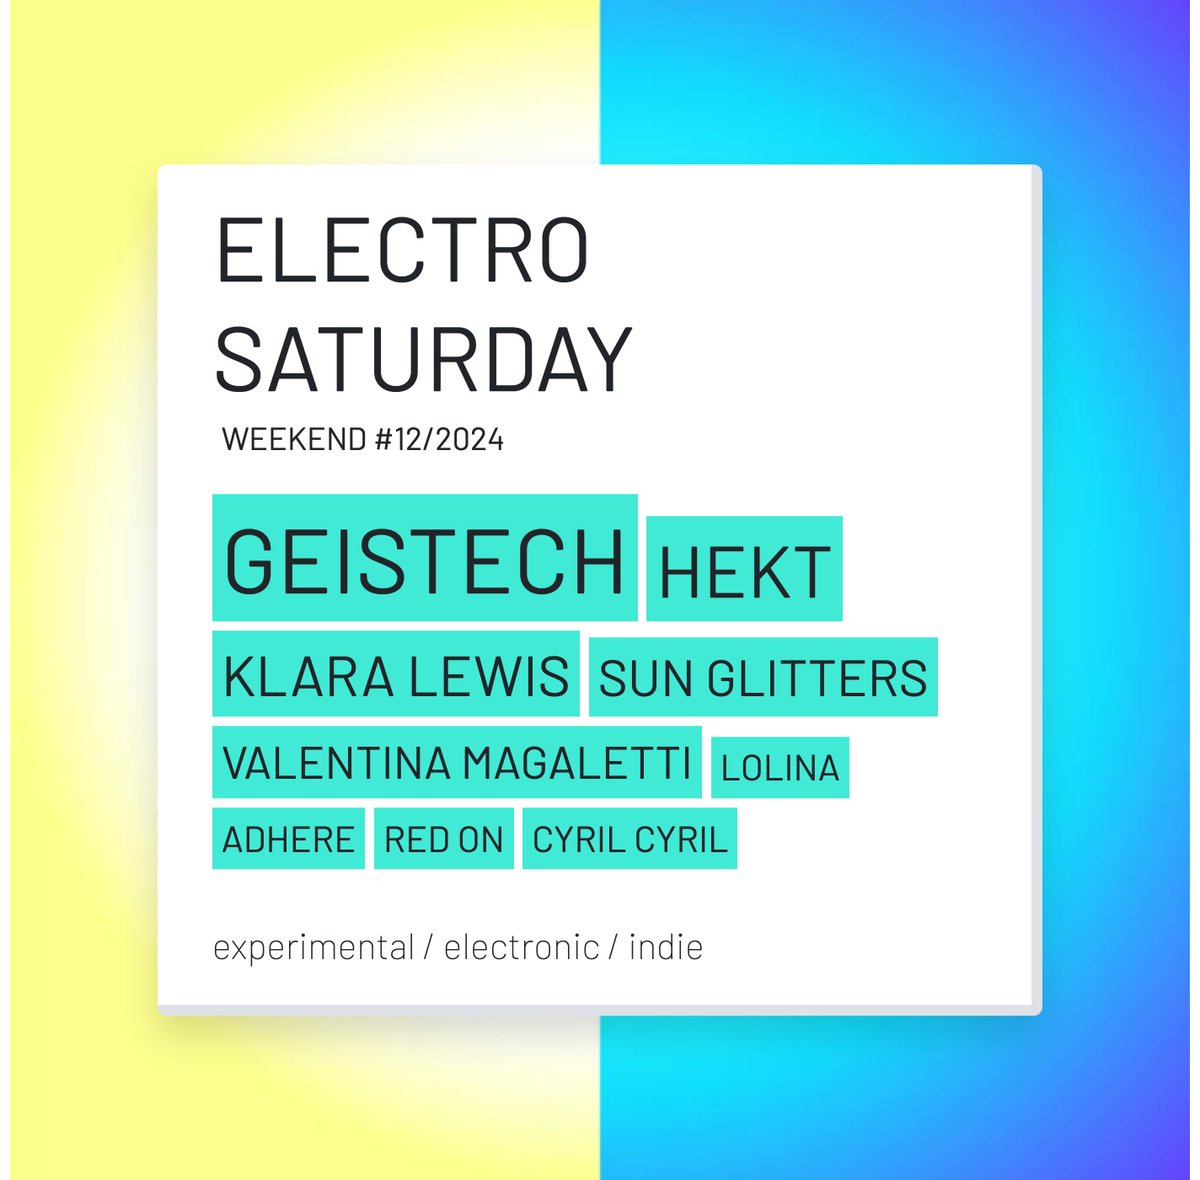 ⚡️⚡️#ELECTROSATURDAY ⚡️⚡️ 🤯🔊WEEKEND #12/24🚨💣 check out our favourite electro releases hashbrandnew.com/L/169265 1:@geistech 2: #Hekt 3:@KlaraLewis_ 4:@sunglitters 5: #ValentinaMagaletti 6:@lolina_relaxin 7: #Adhere 8: #RedOn 9: #CyrilCyril #Electronic #Experimental